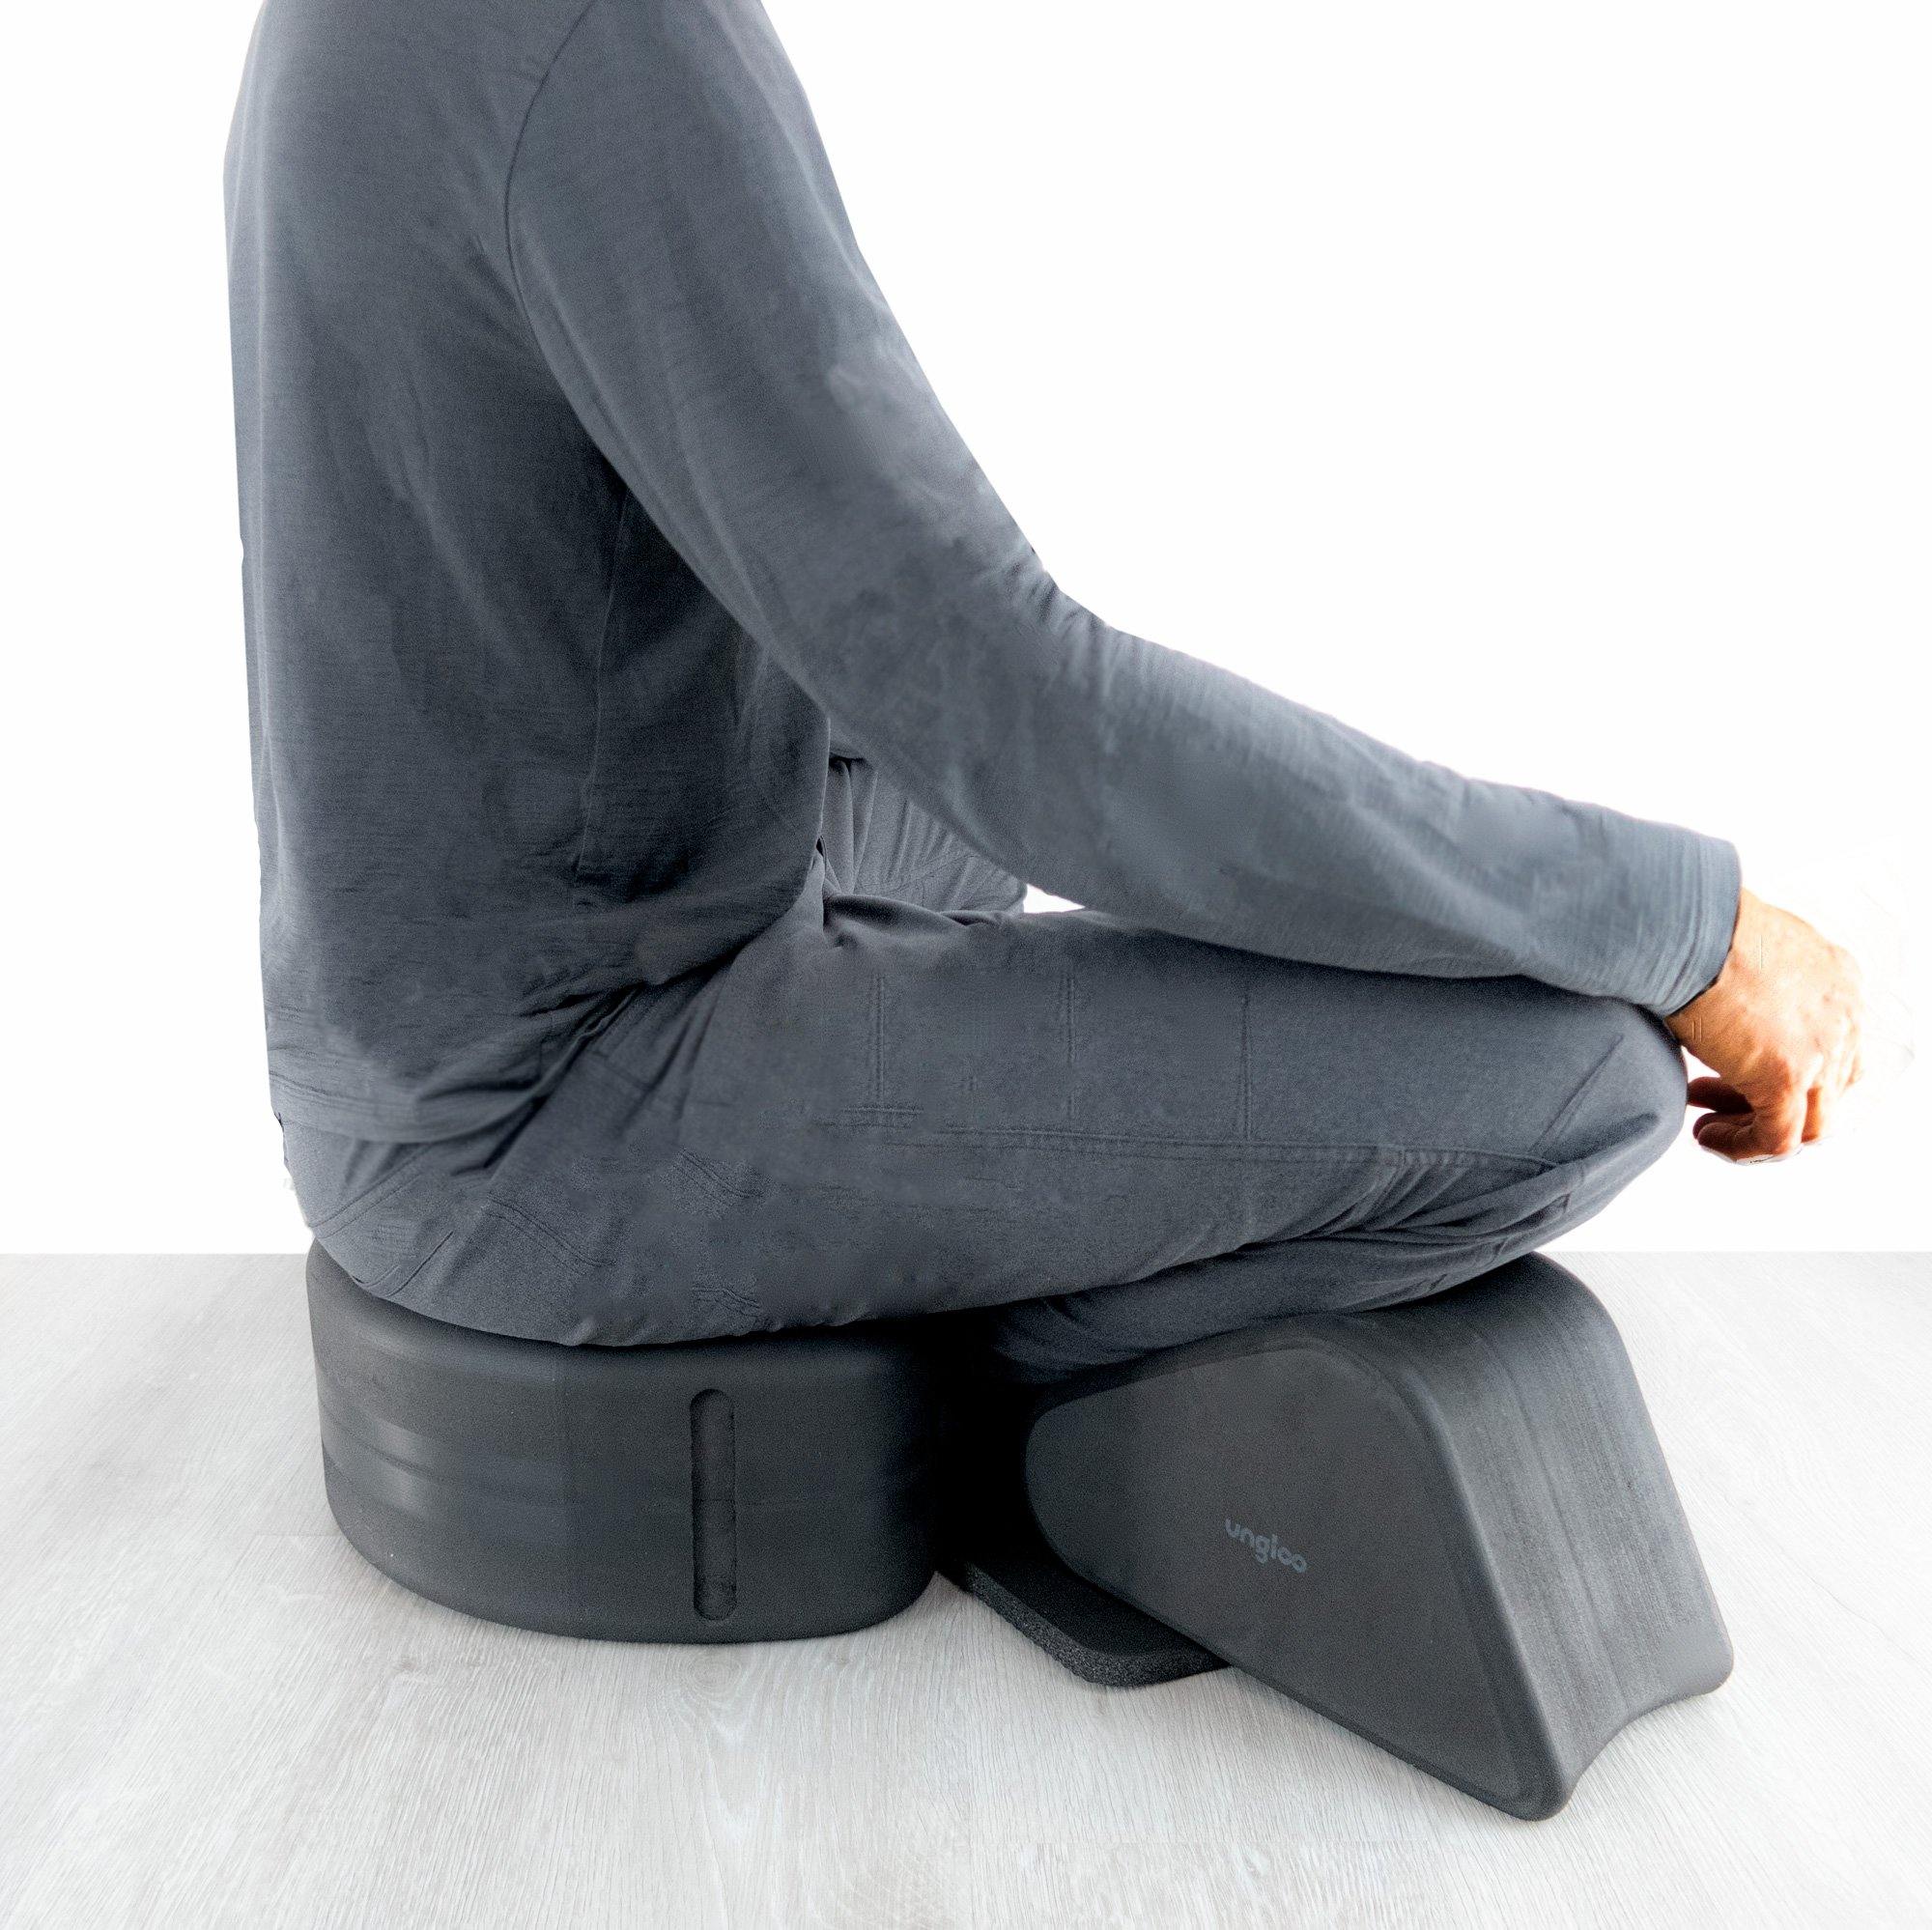 Image showing how the SIT3 meditation kit supports you while sitting cross legged. 